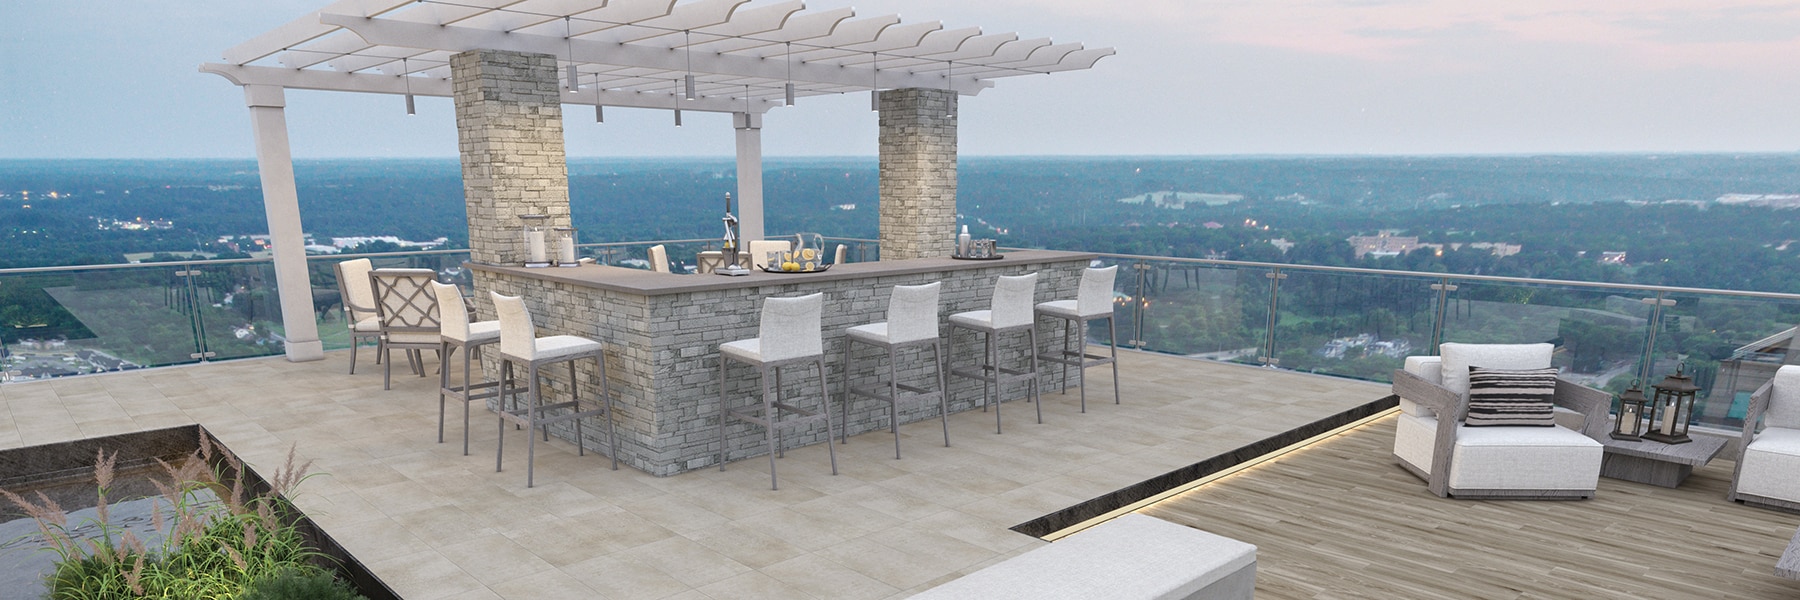 Rooftop patio with a city view, gray stacked stone bar, seating area with white couch, chairs, gray coffee & side tables, and wood look slip-resistant floor tile.